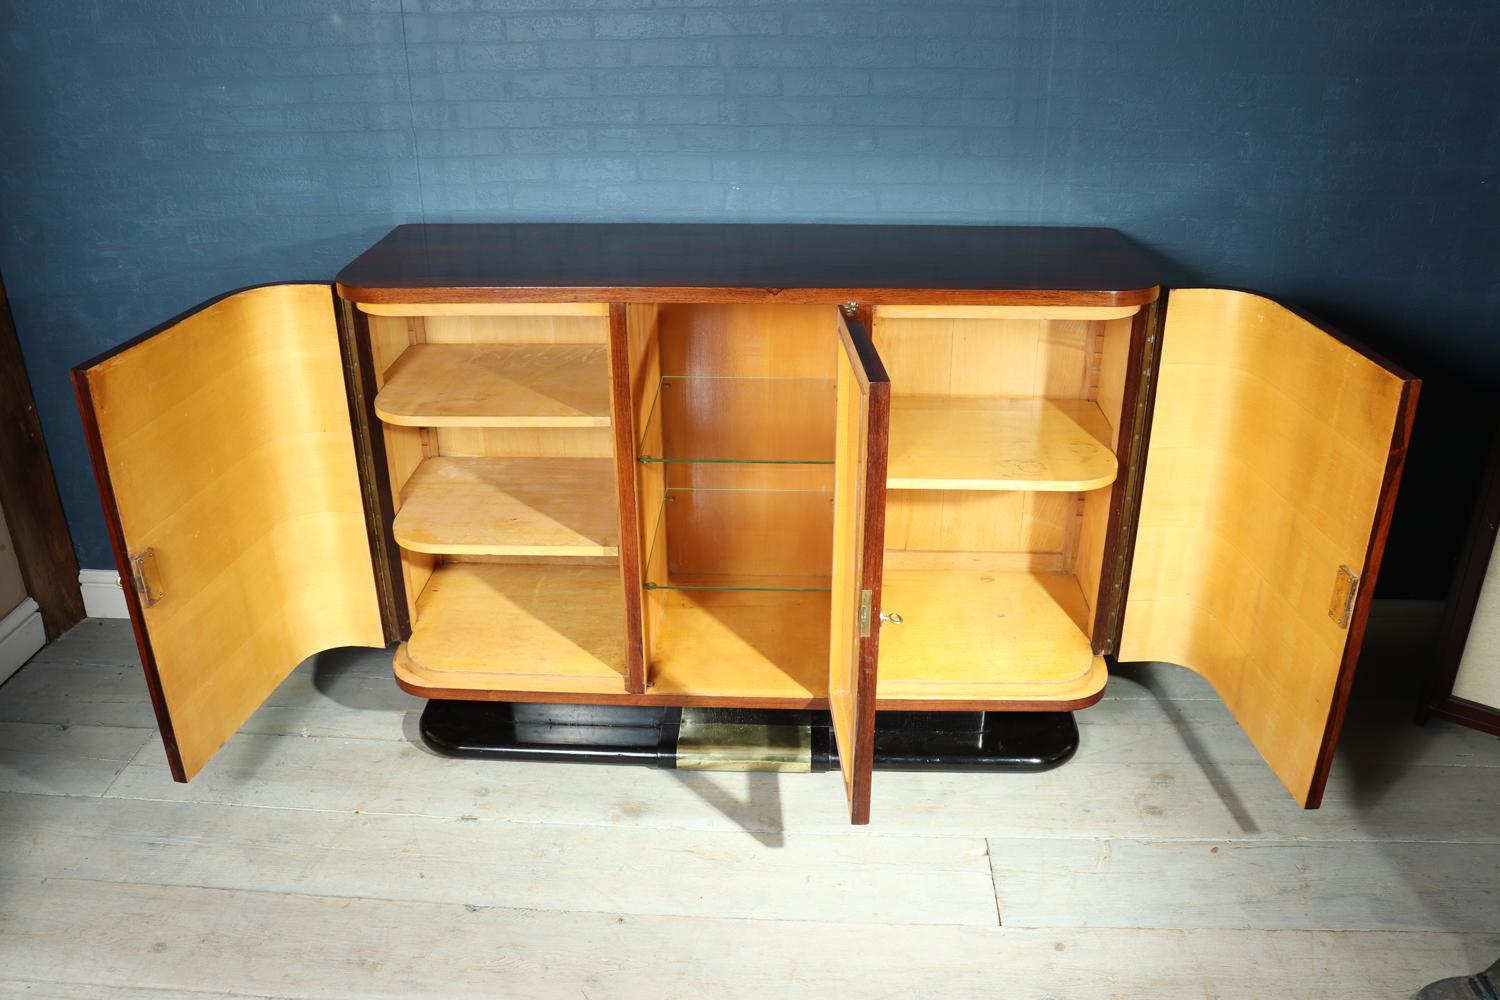 French Art Deco Sideboard in Rosewood, circa 1930 1